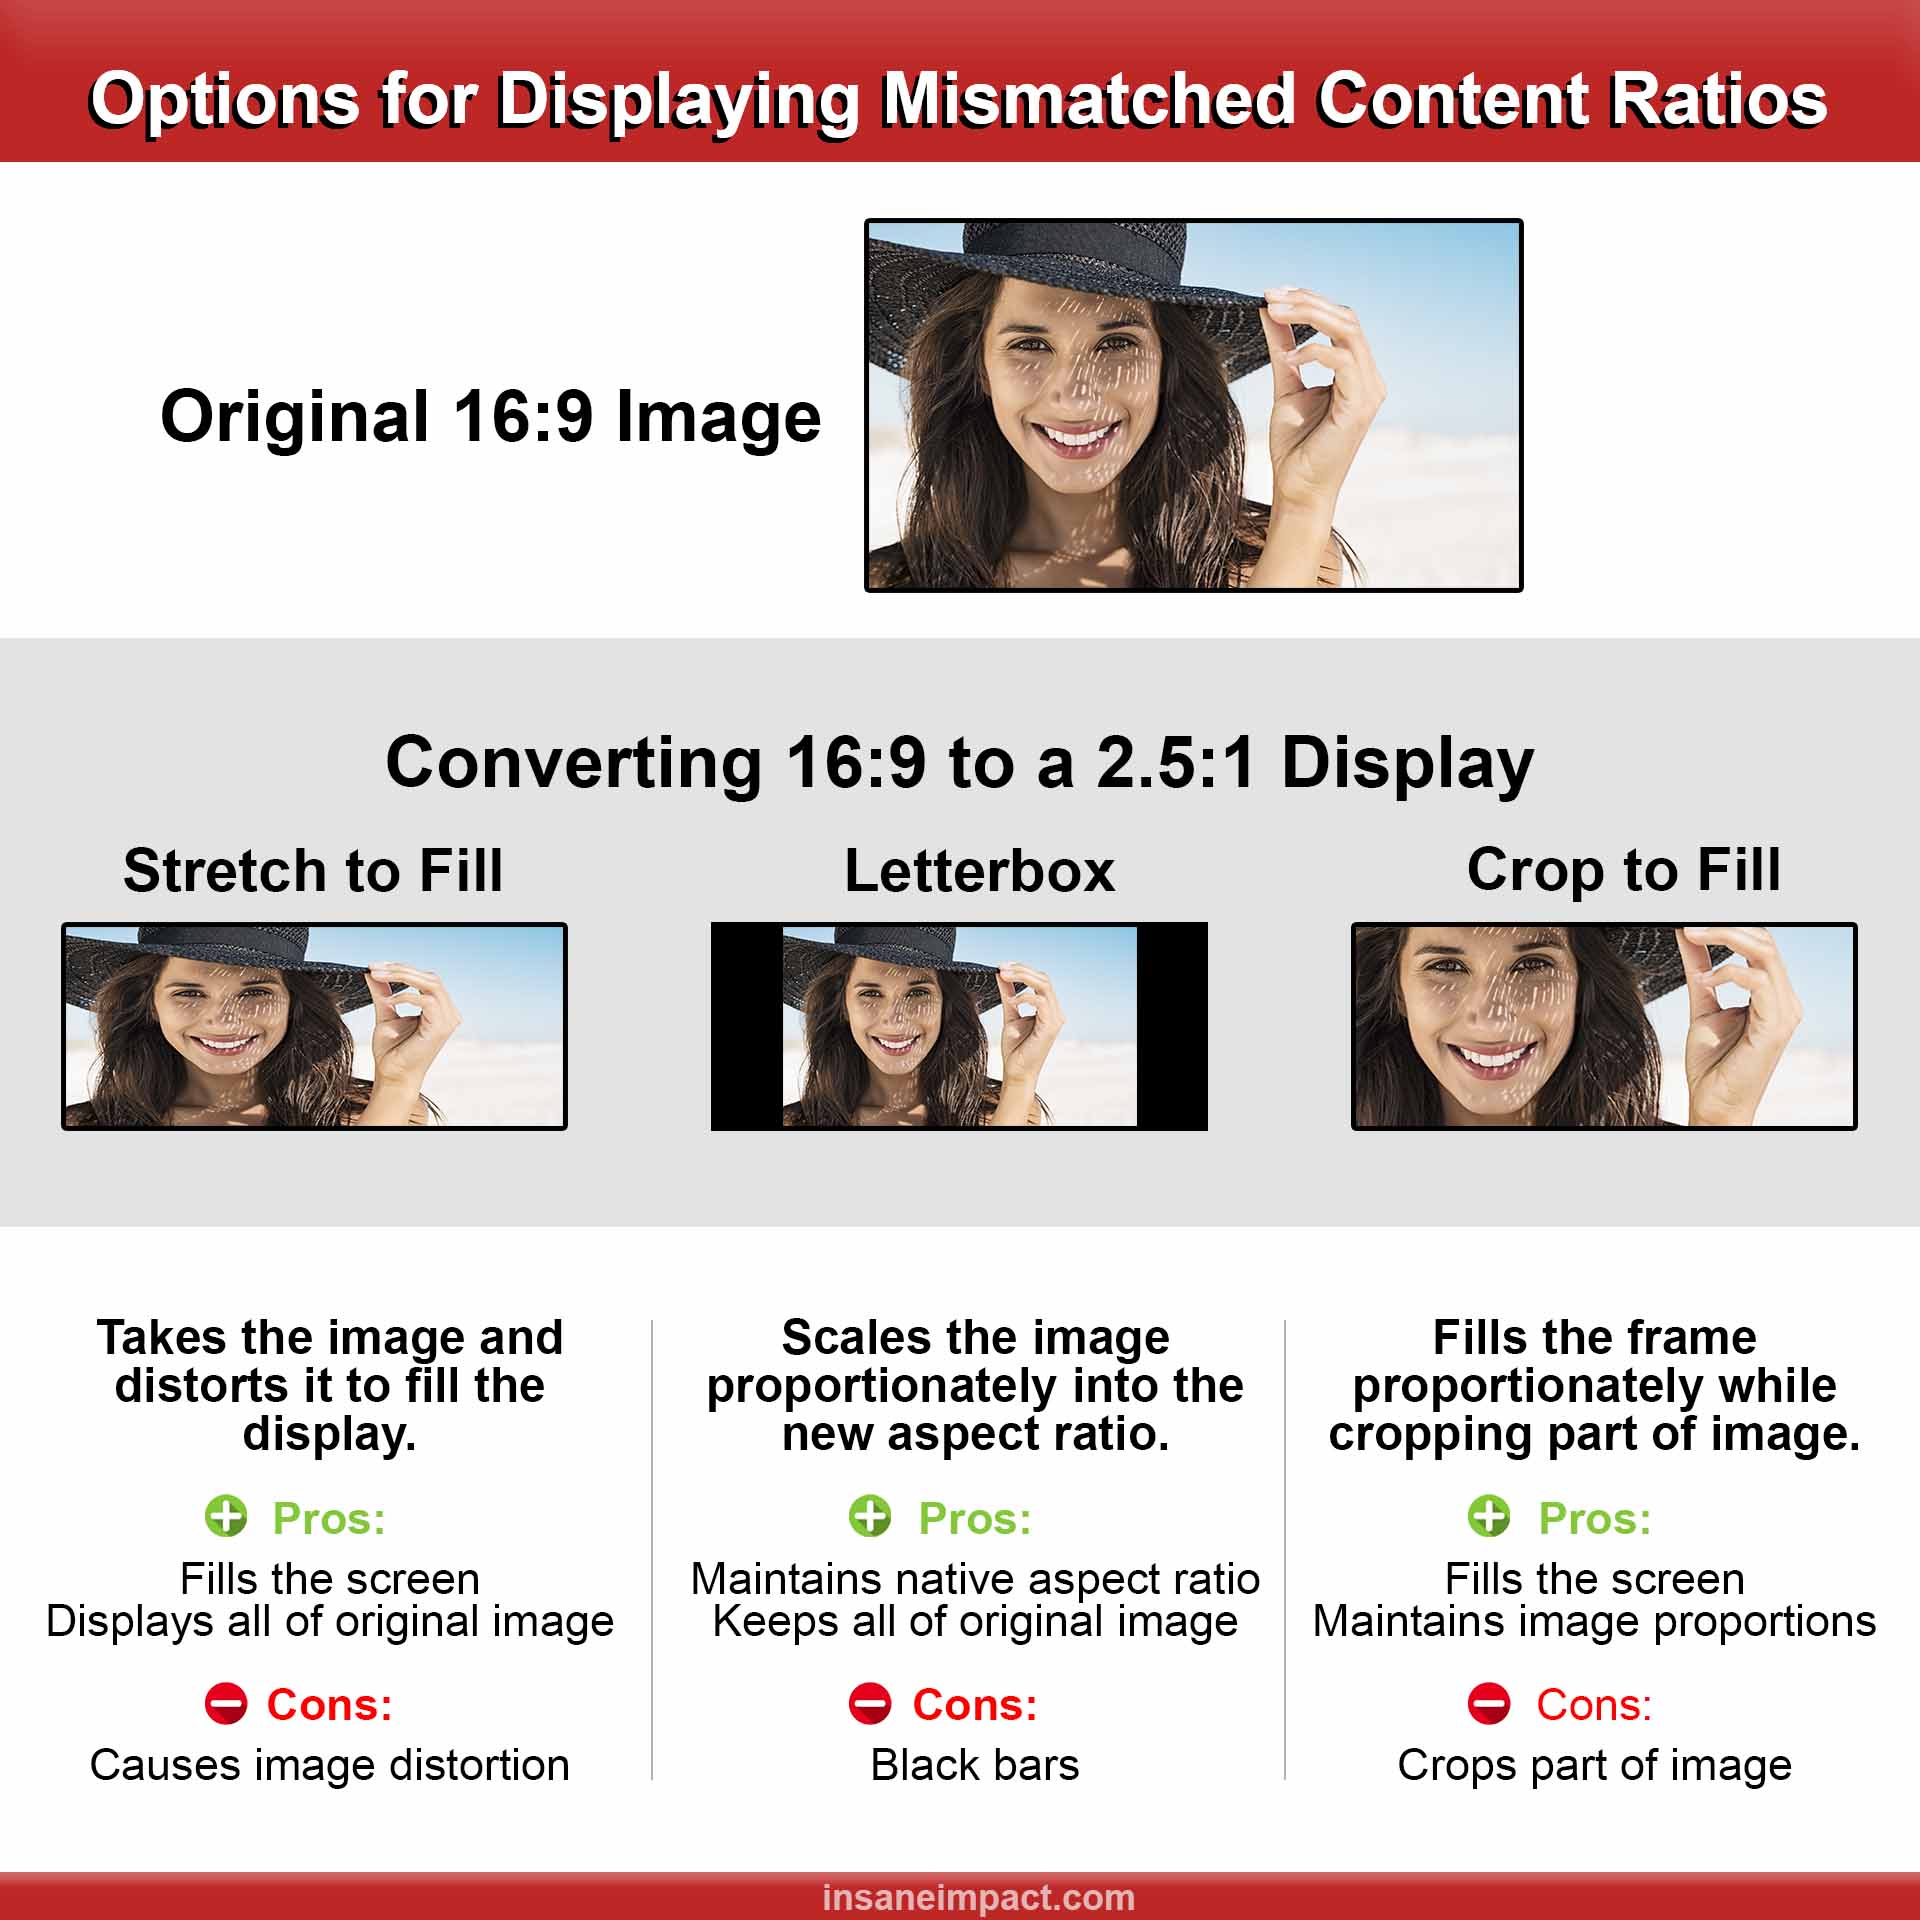 infographic illustrating 3 options for displaying 16 9 ratio content onto non 16 9 screens including stretch to fill letterbox and crop to fill with advantages and disadvantages of each